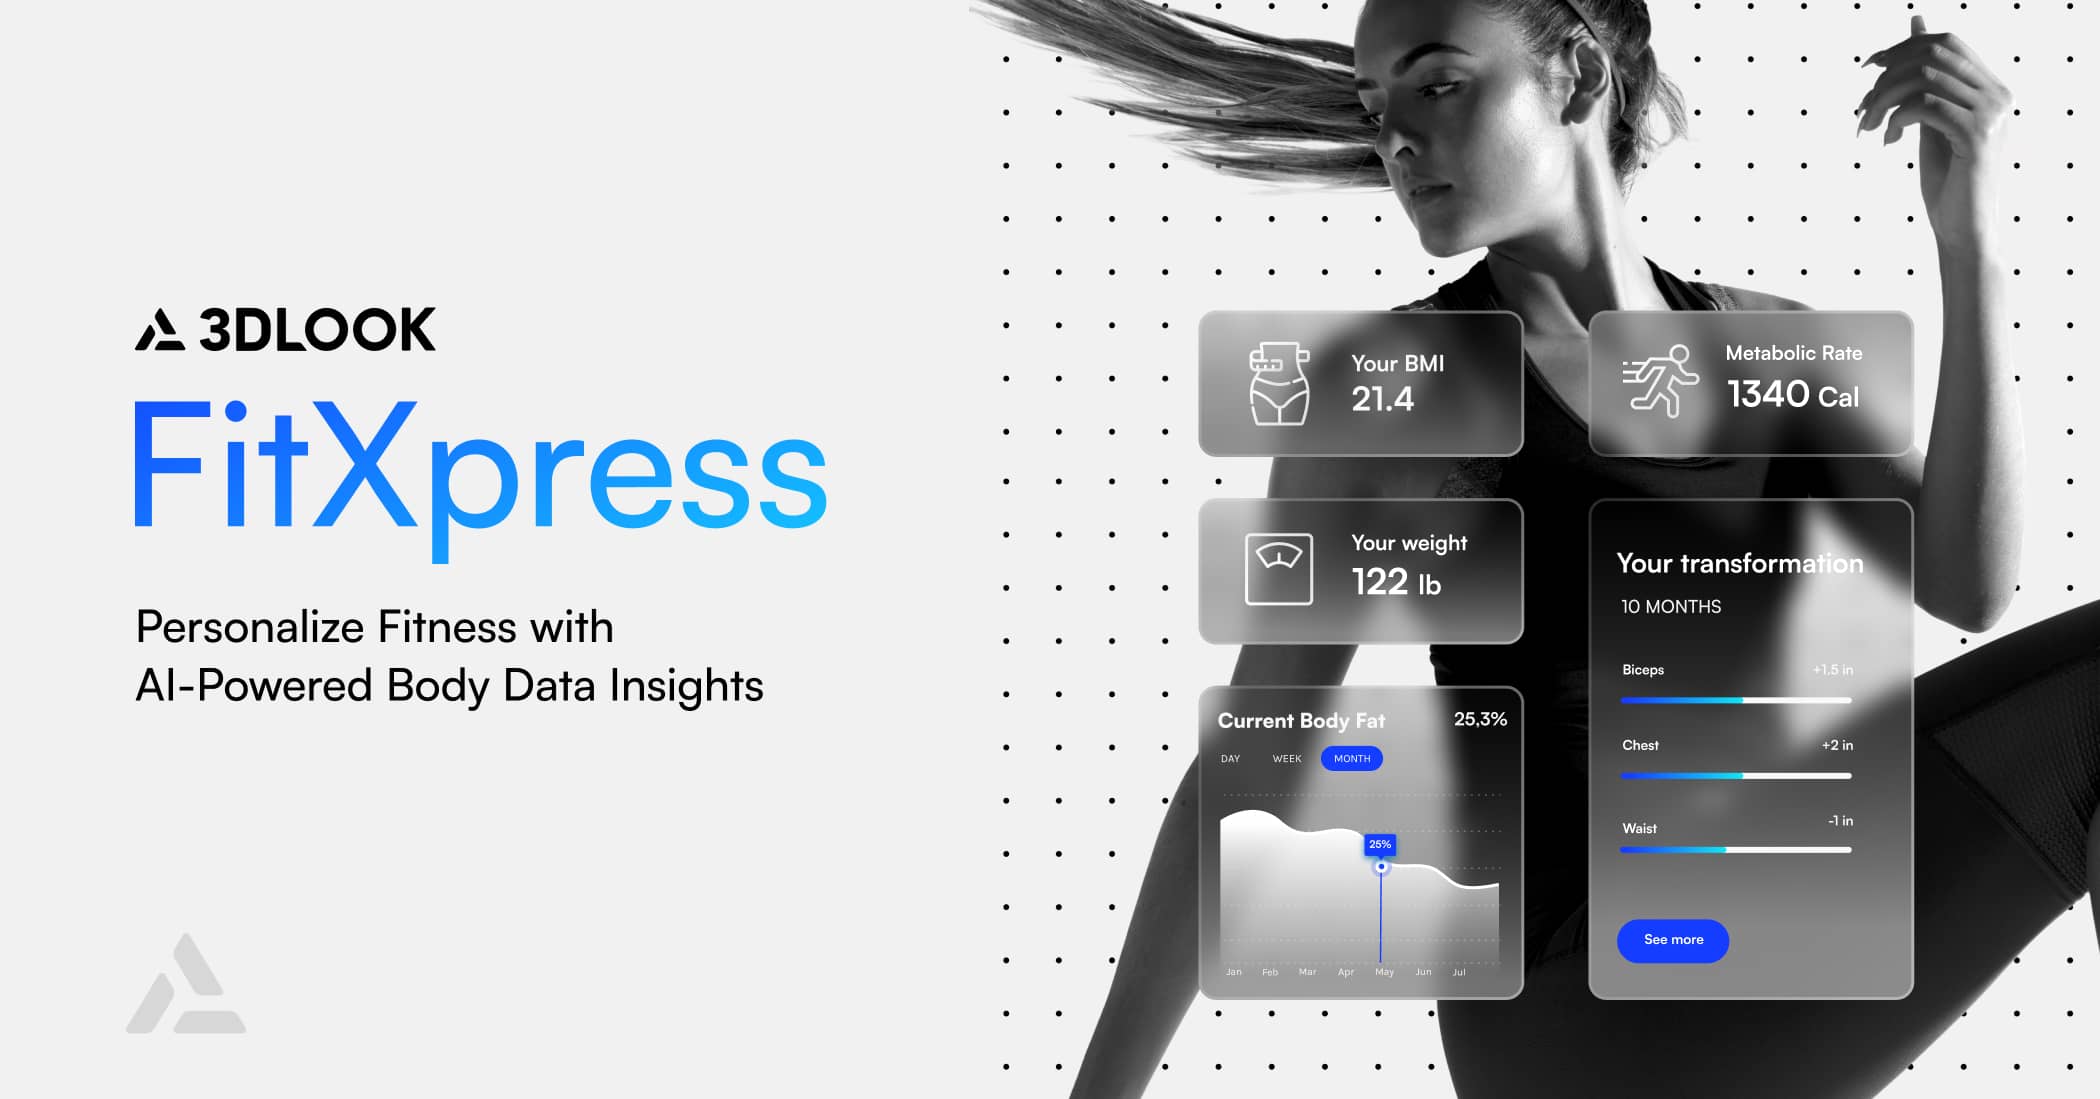 Promotional image for 3DLOOK's FitXpress featuring a person alongside fitness data displays including BMI, weight, metabolic rate, body fat percentage, and transformation progress. Text: 